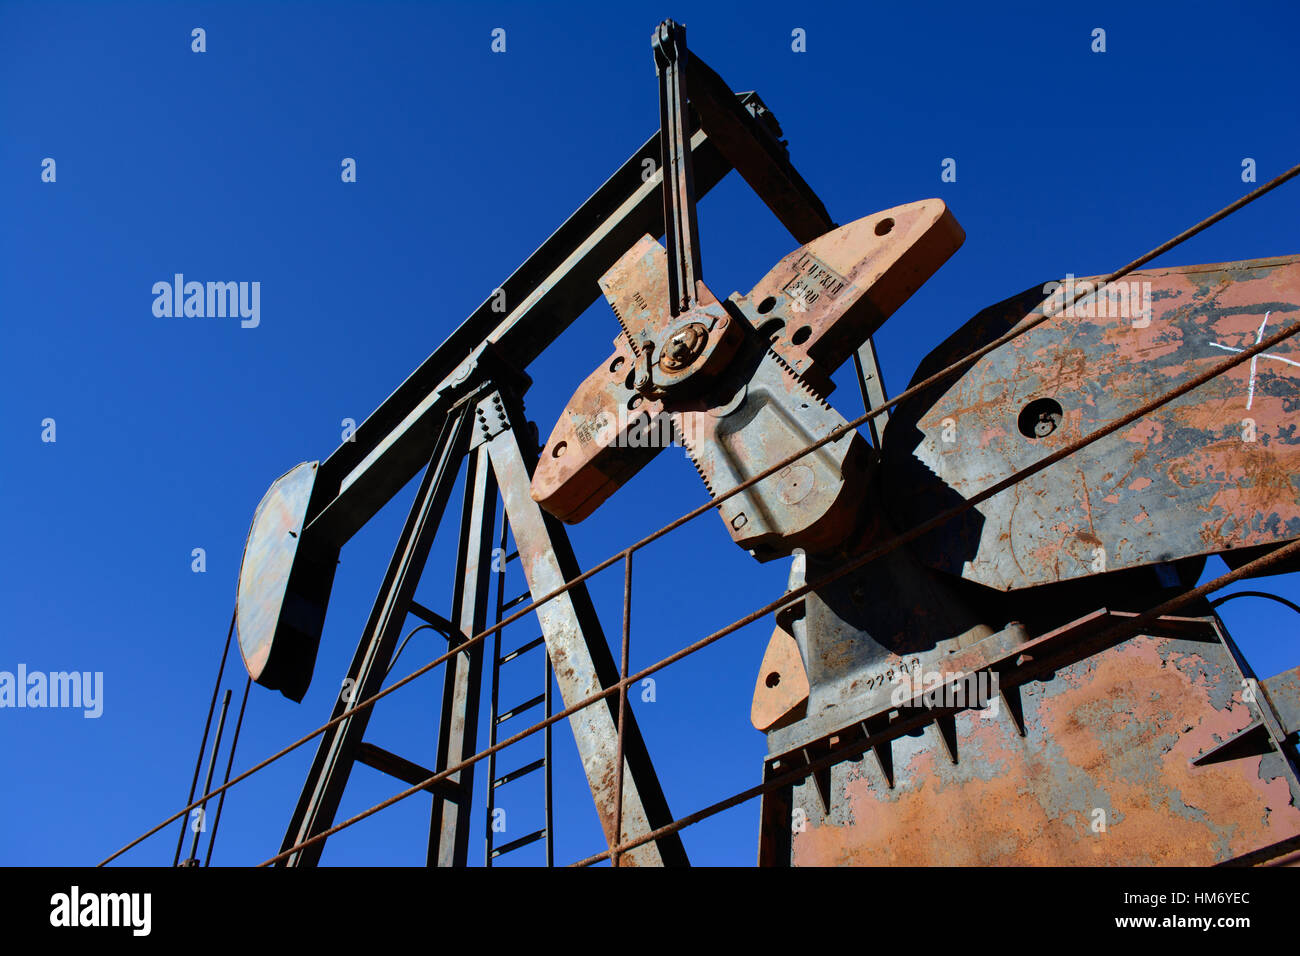 Rusty Oilfield Pumpjack (rocking horse) over a wellhead. Clear blue sky background. Illustrates oilfield life, petroleum industry and fossil fuels. Stock Photo